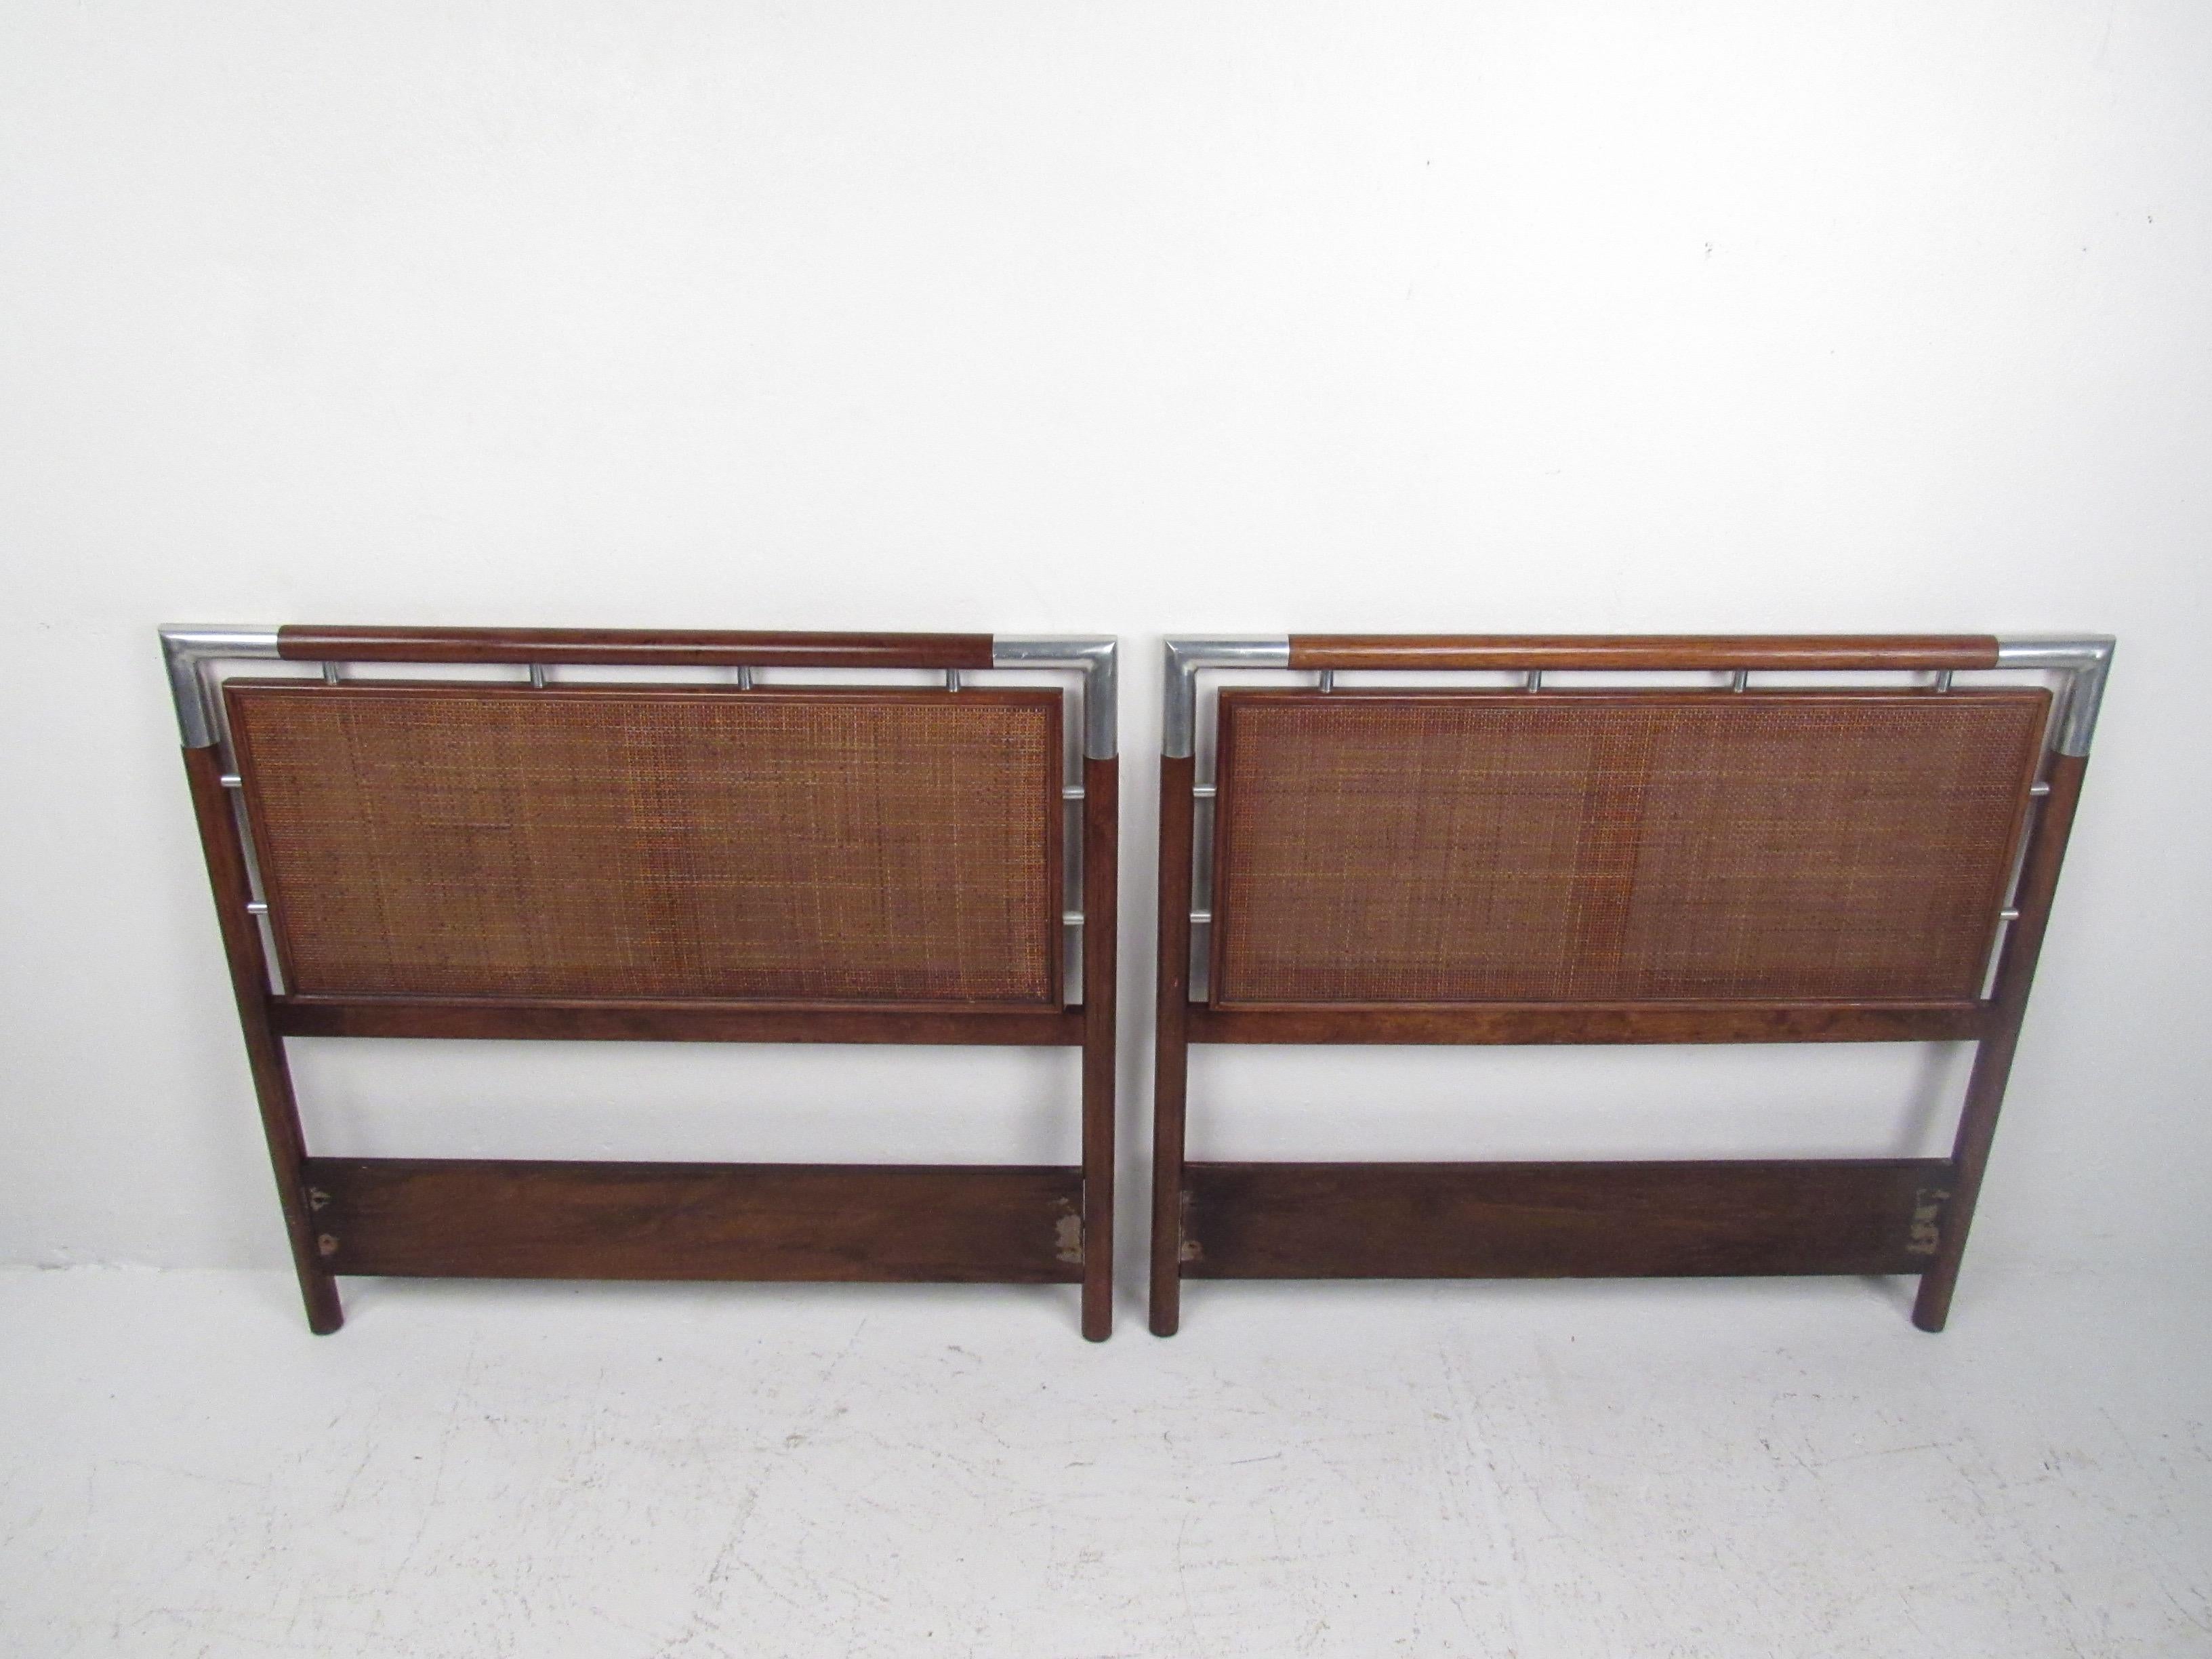 This vintage modern pair of headboards features a unique Mid-Century design with woven cane and chrome details. Can be used for a pair of children's beds or as a 